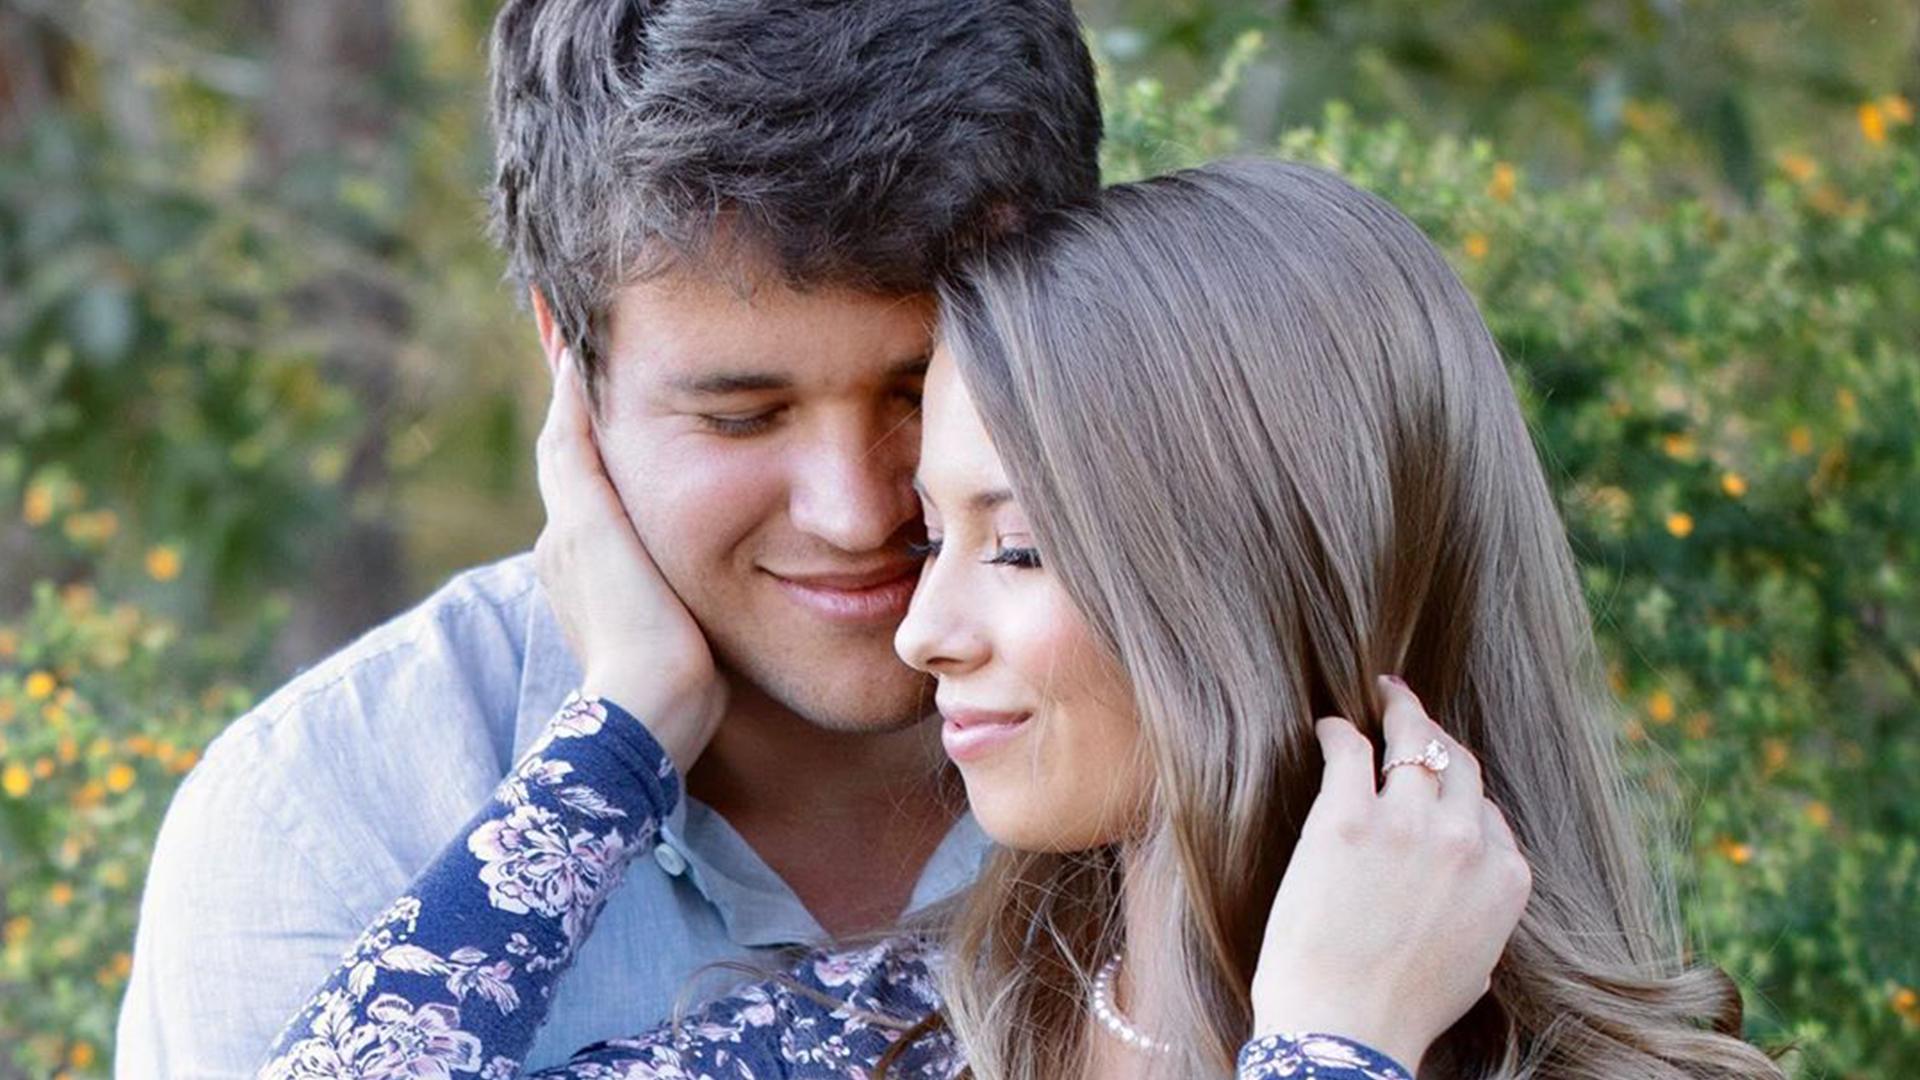 Chandler Powell and fiancée Bindi Irwin reveals their excitement for marraige - Here's everything you want to know